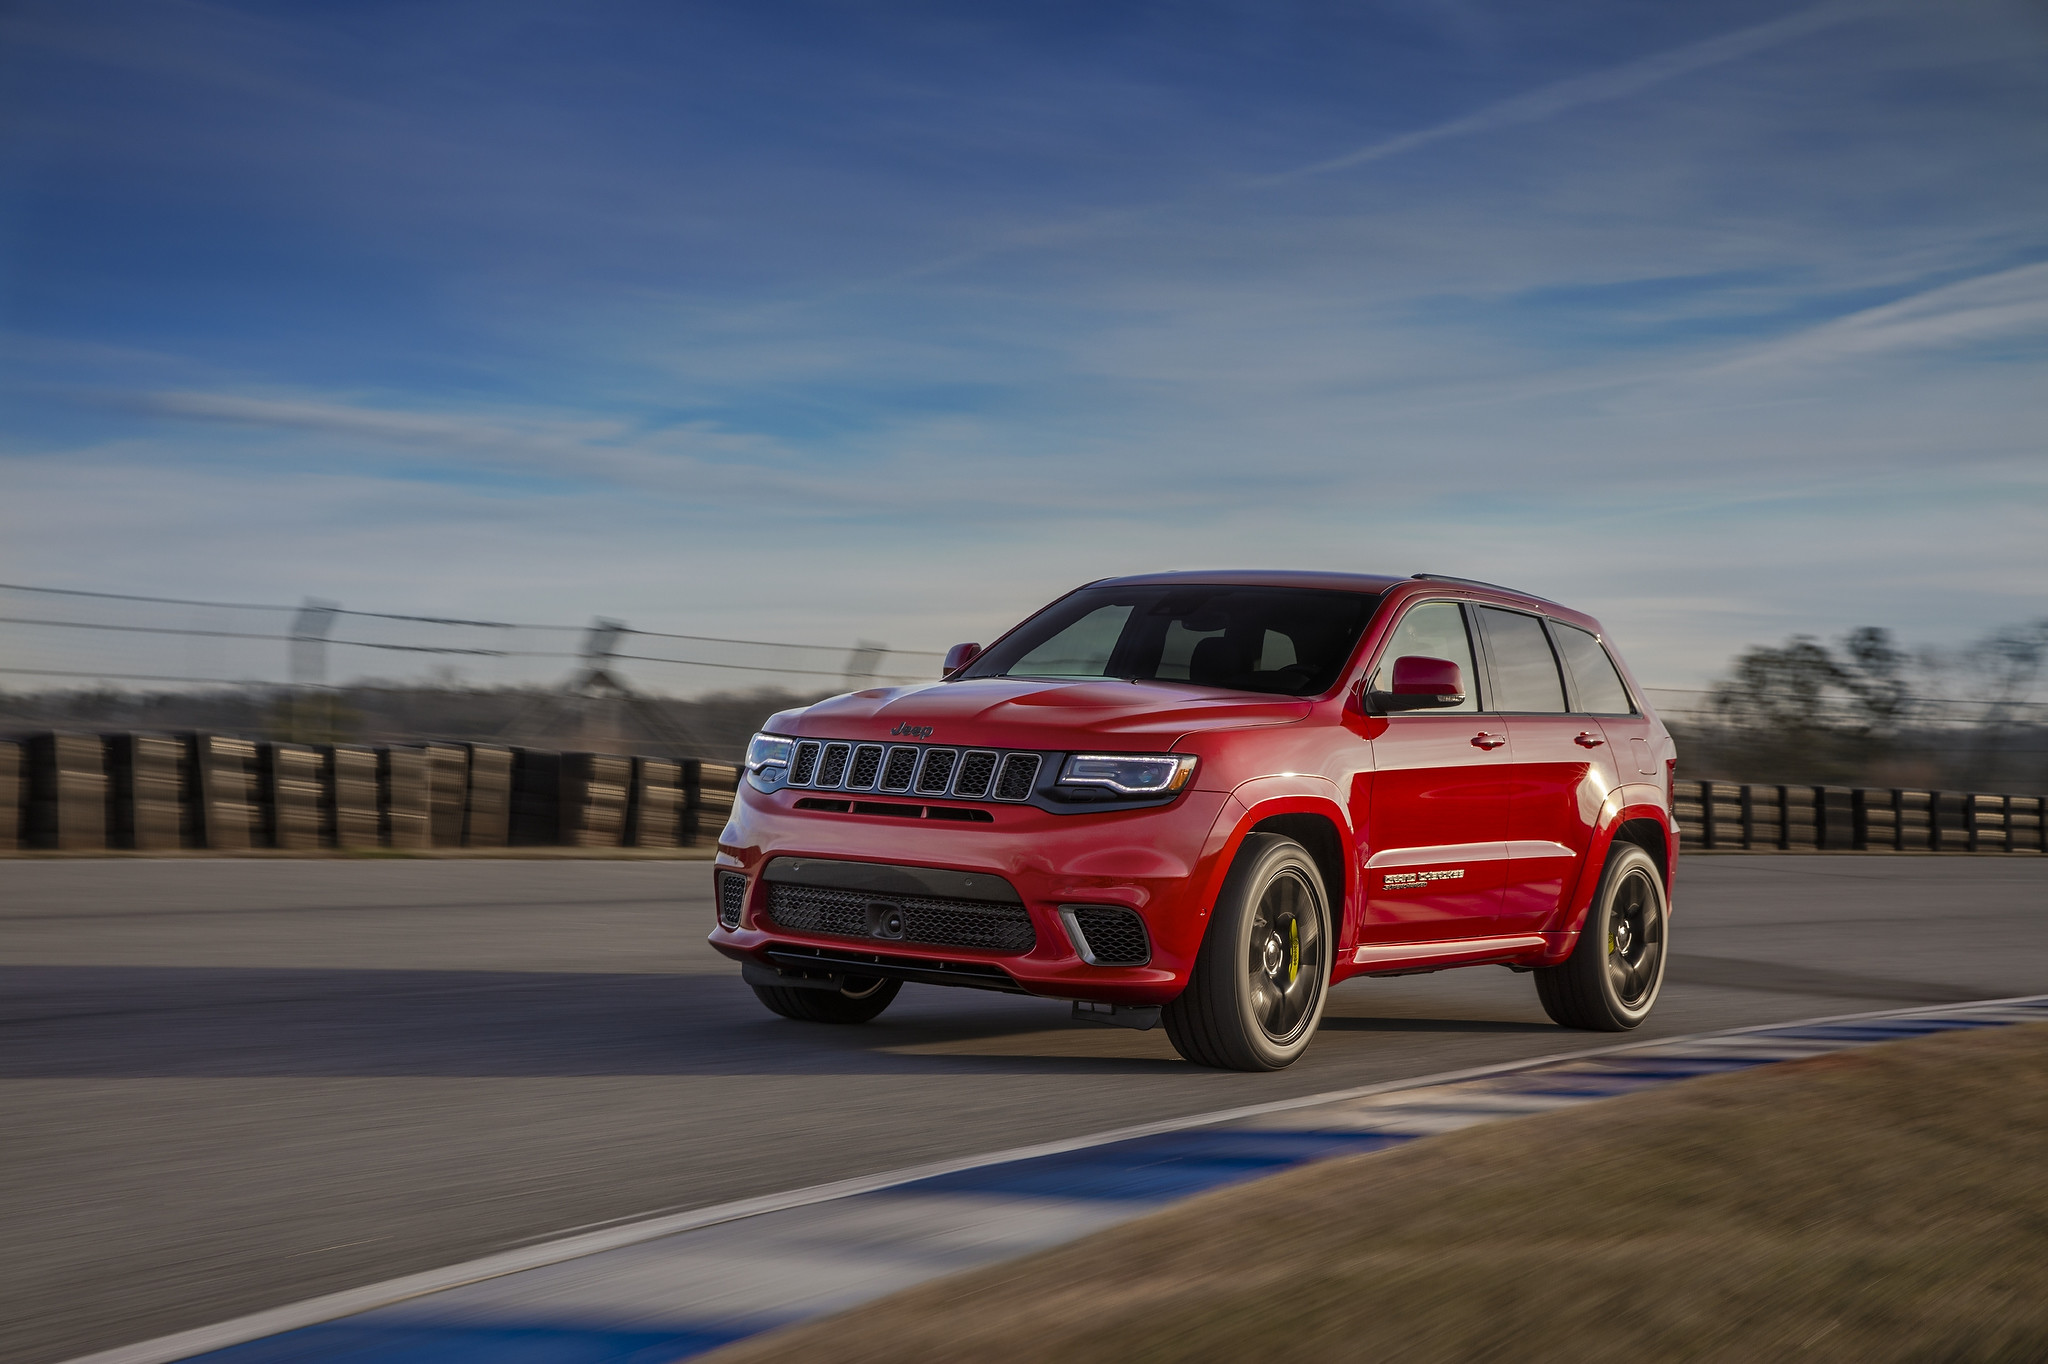 A 2021 Jeep Grand Cherokee Supercharged taking a turn on a racetrack